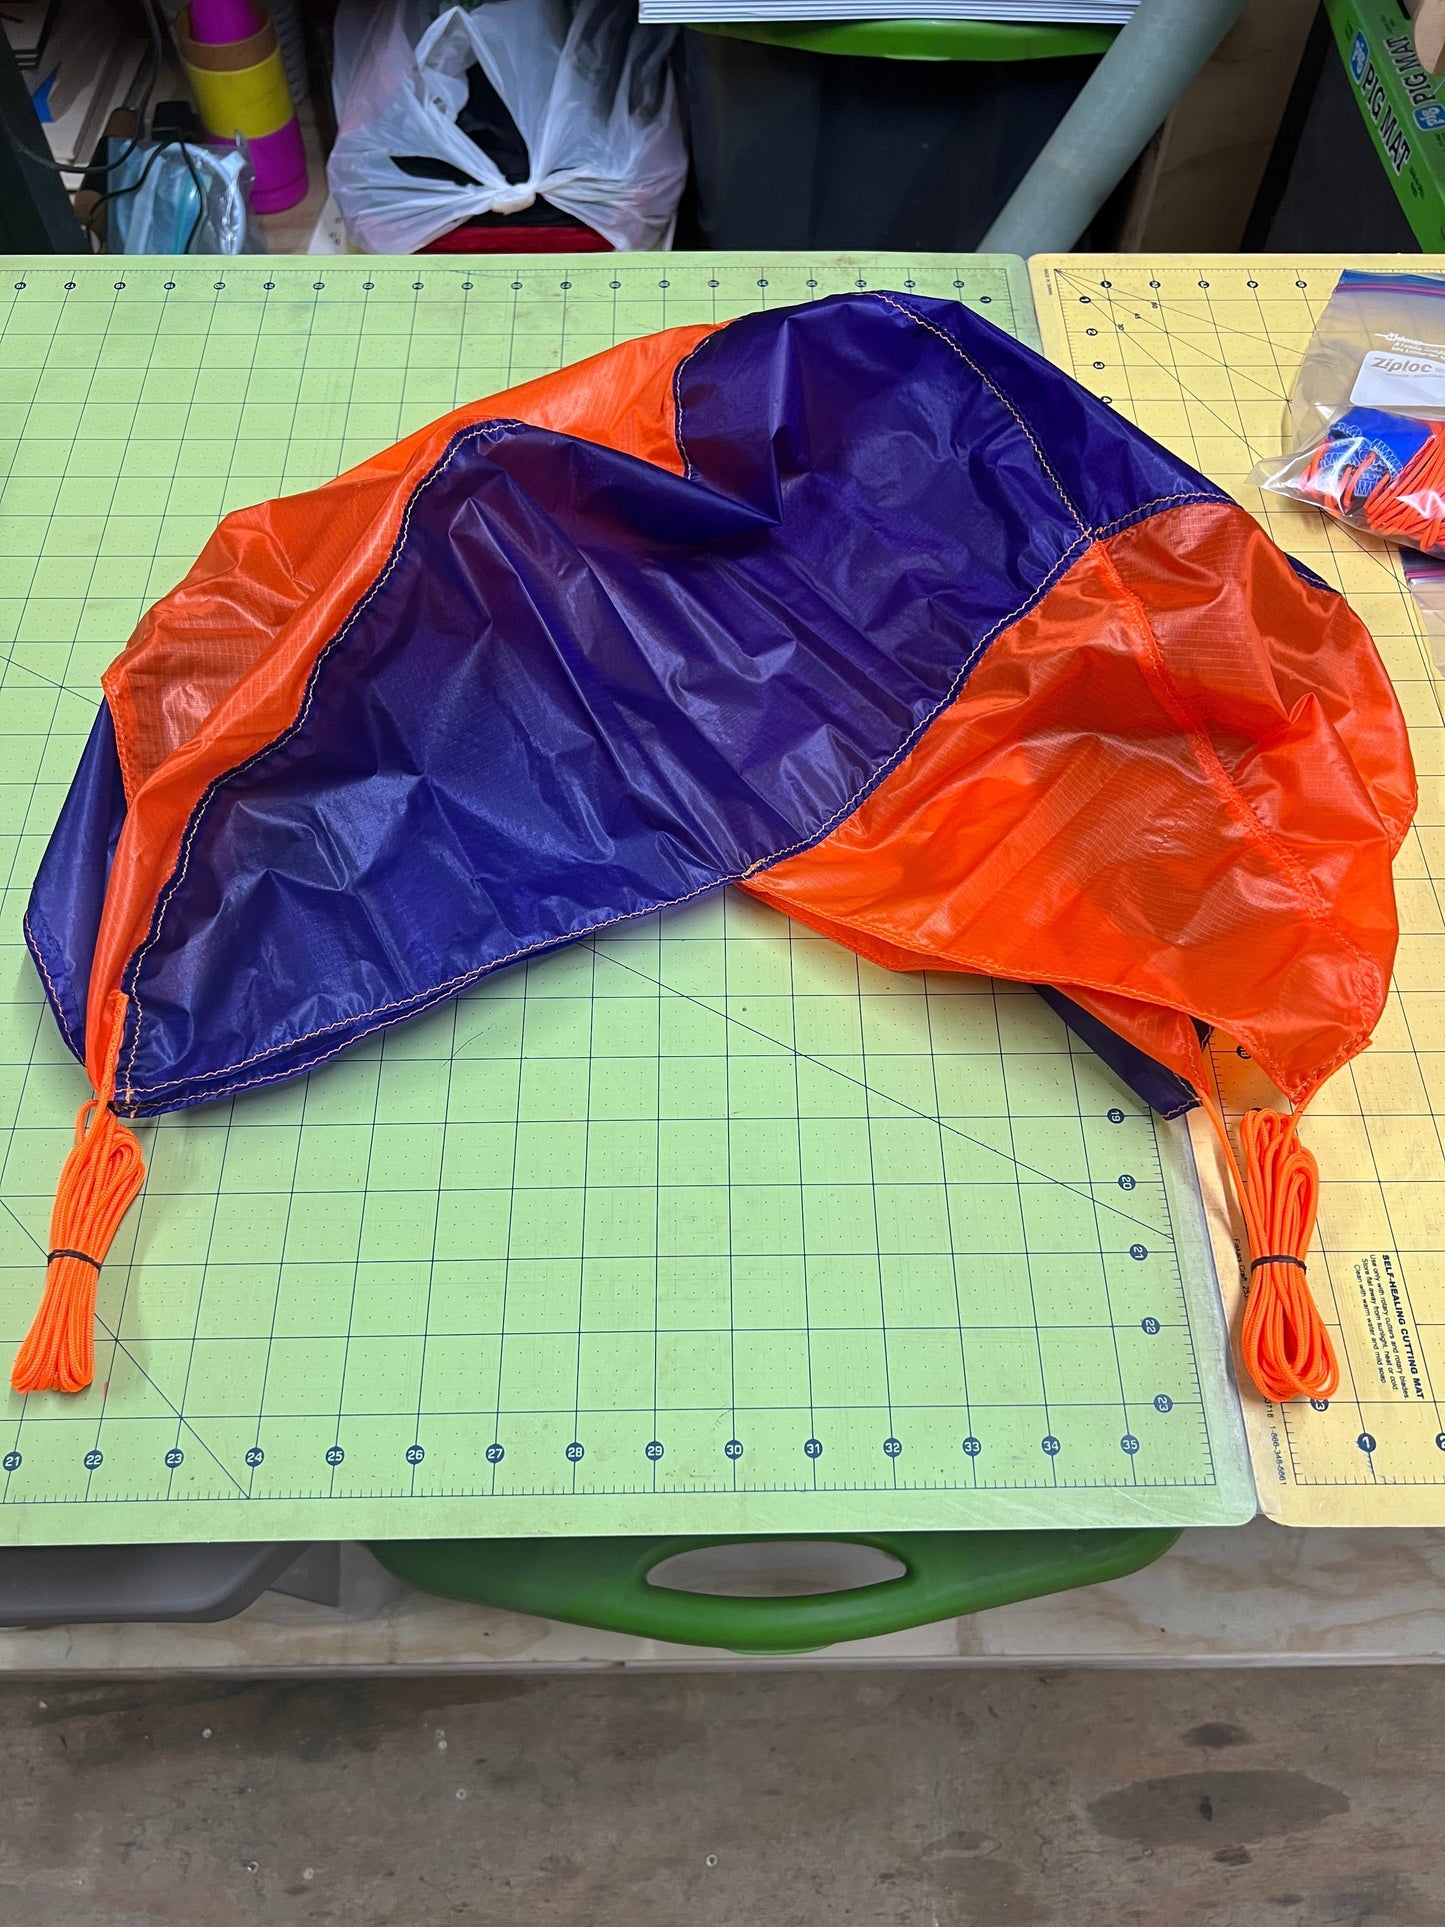 DR-9 Parabolic Cupped Parachute